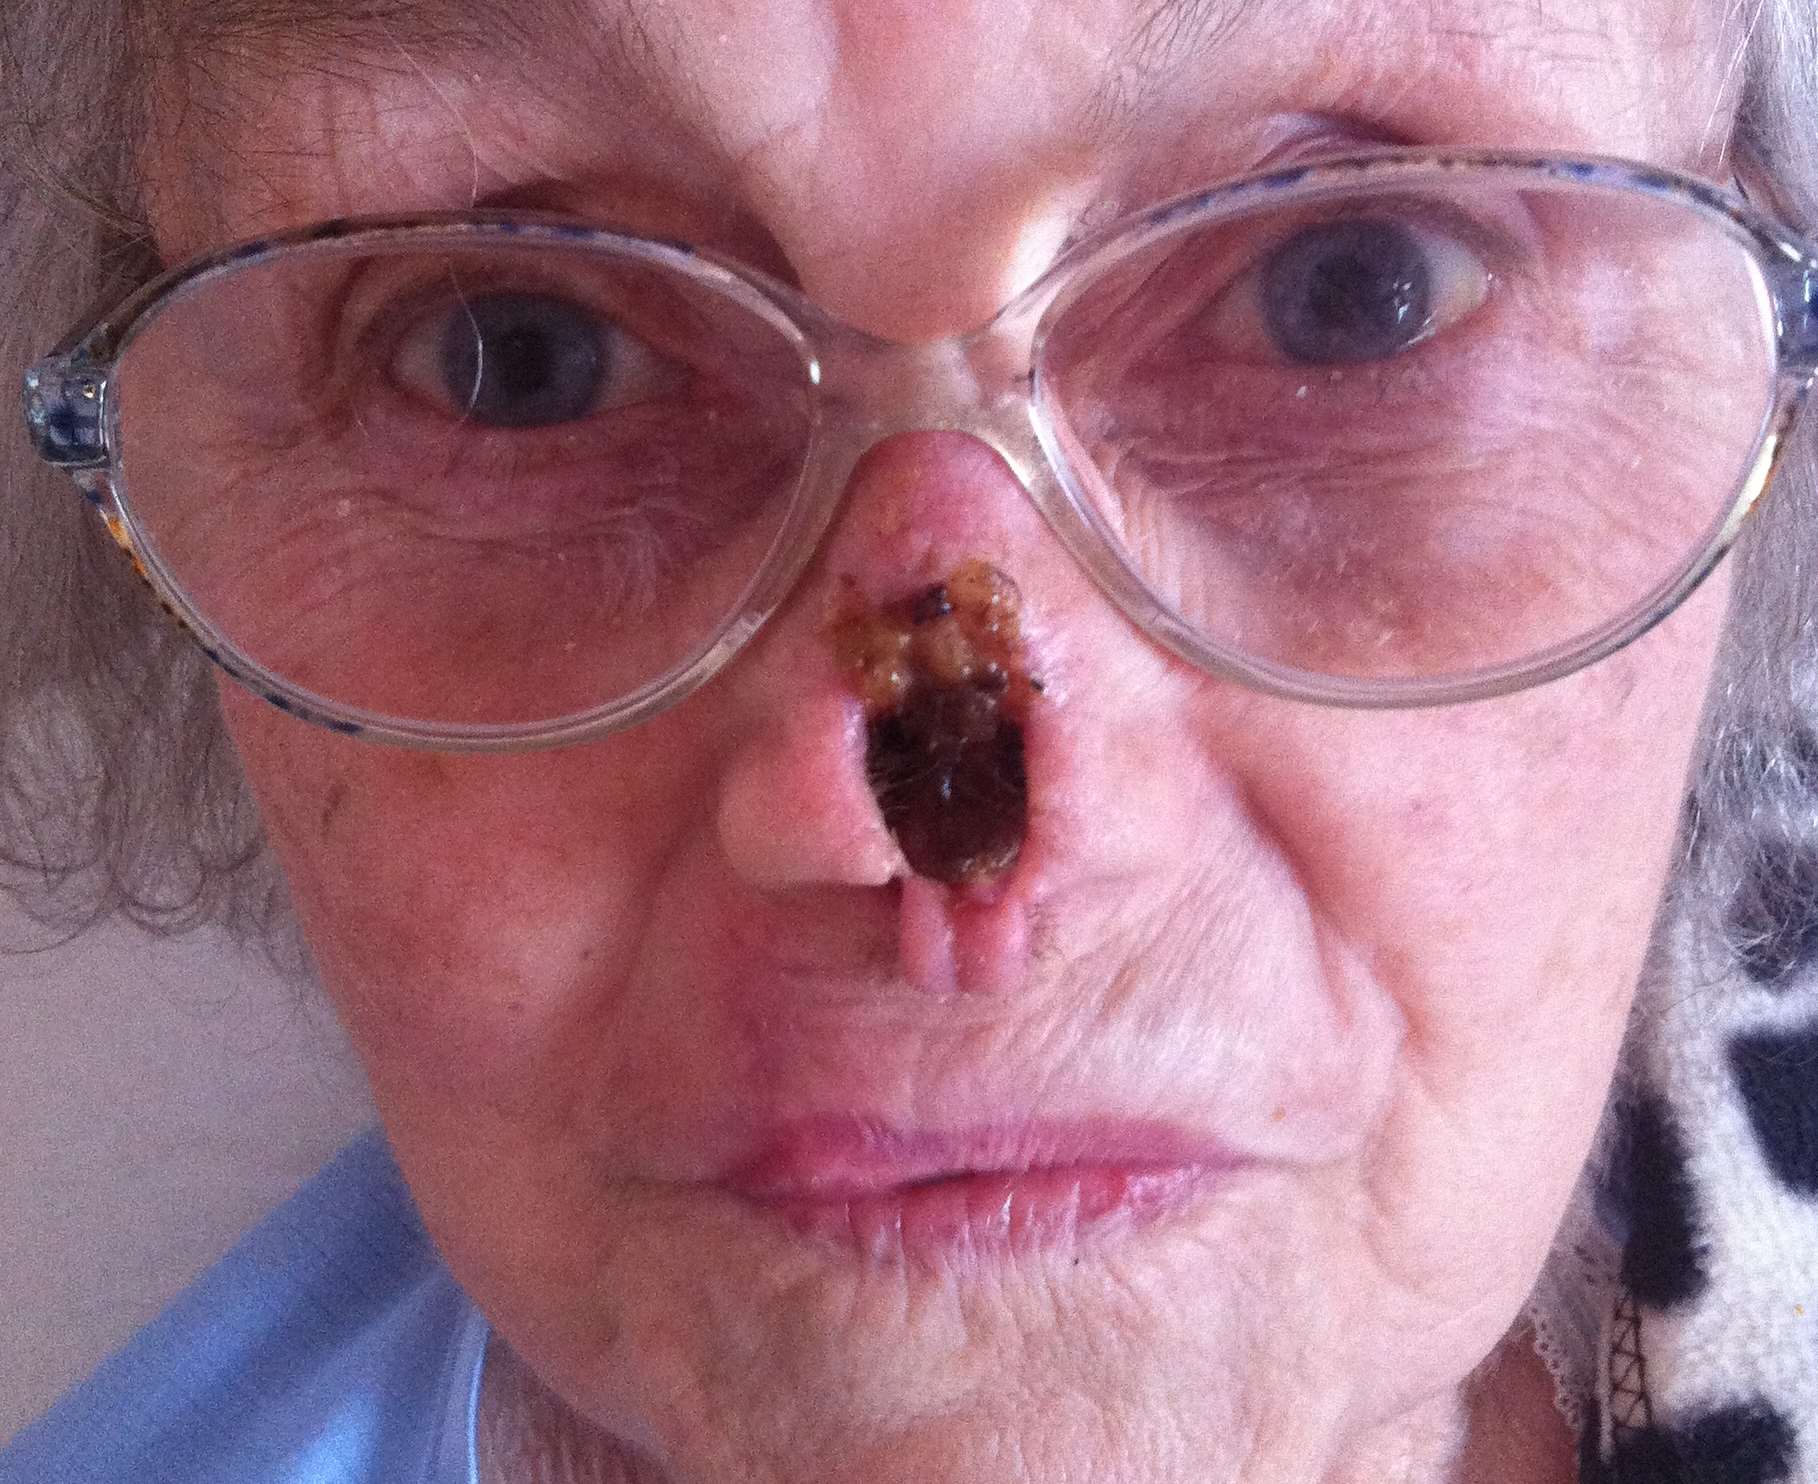 Golda has been left with a hole in her nose